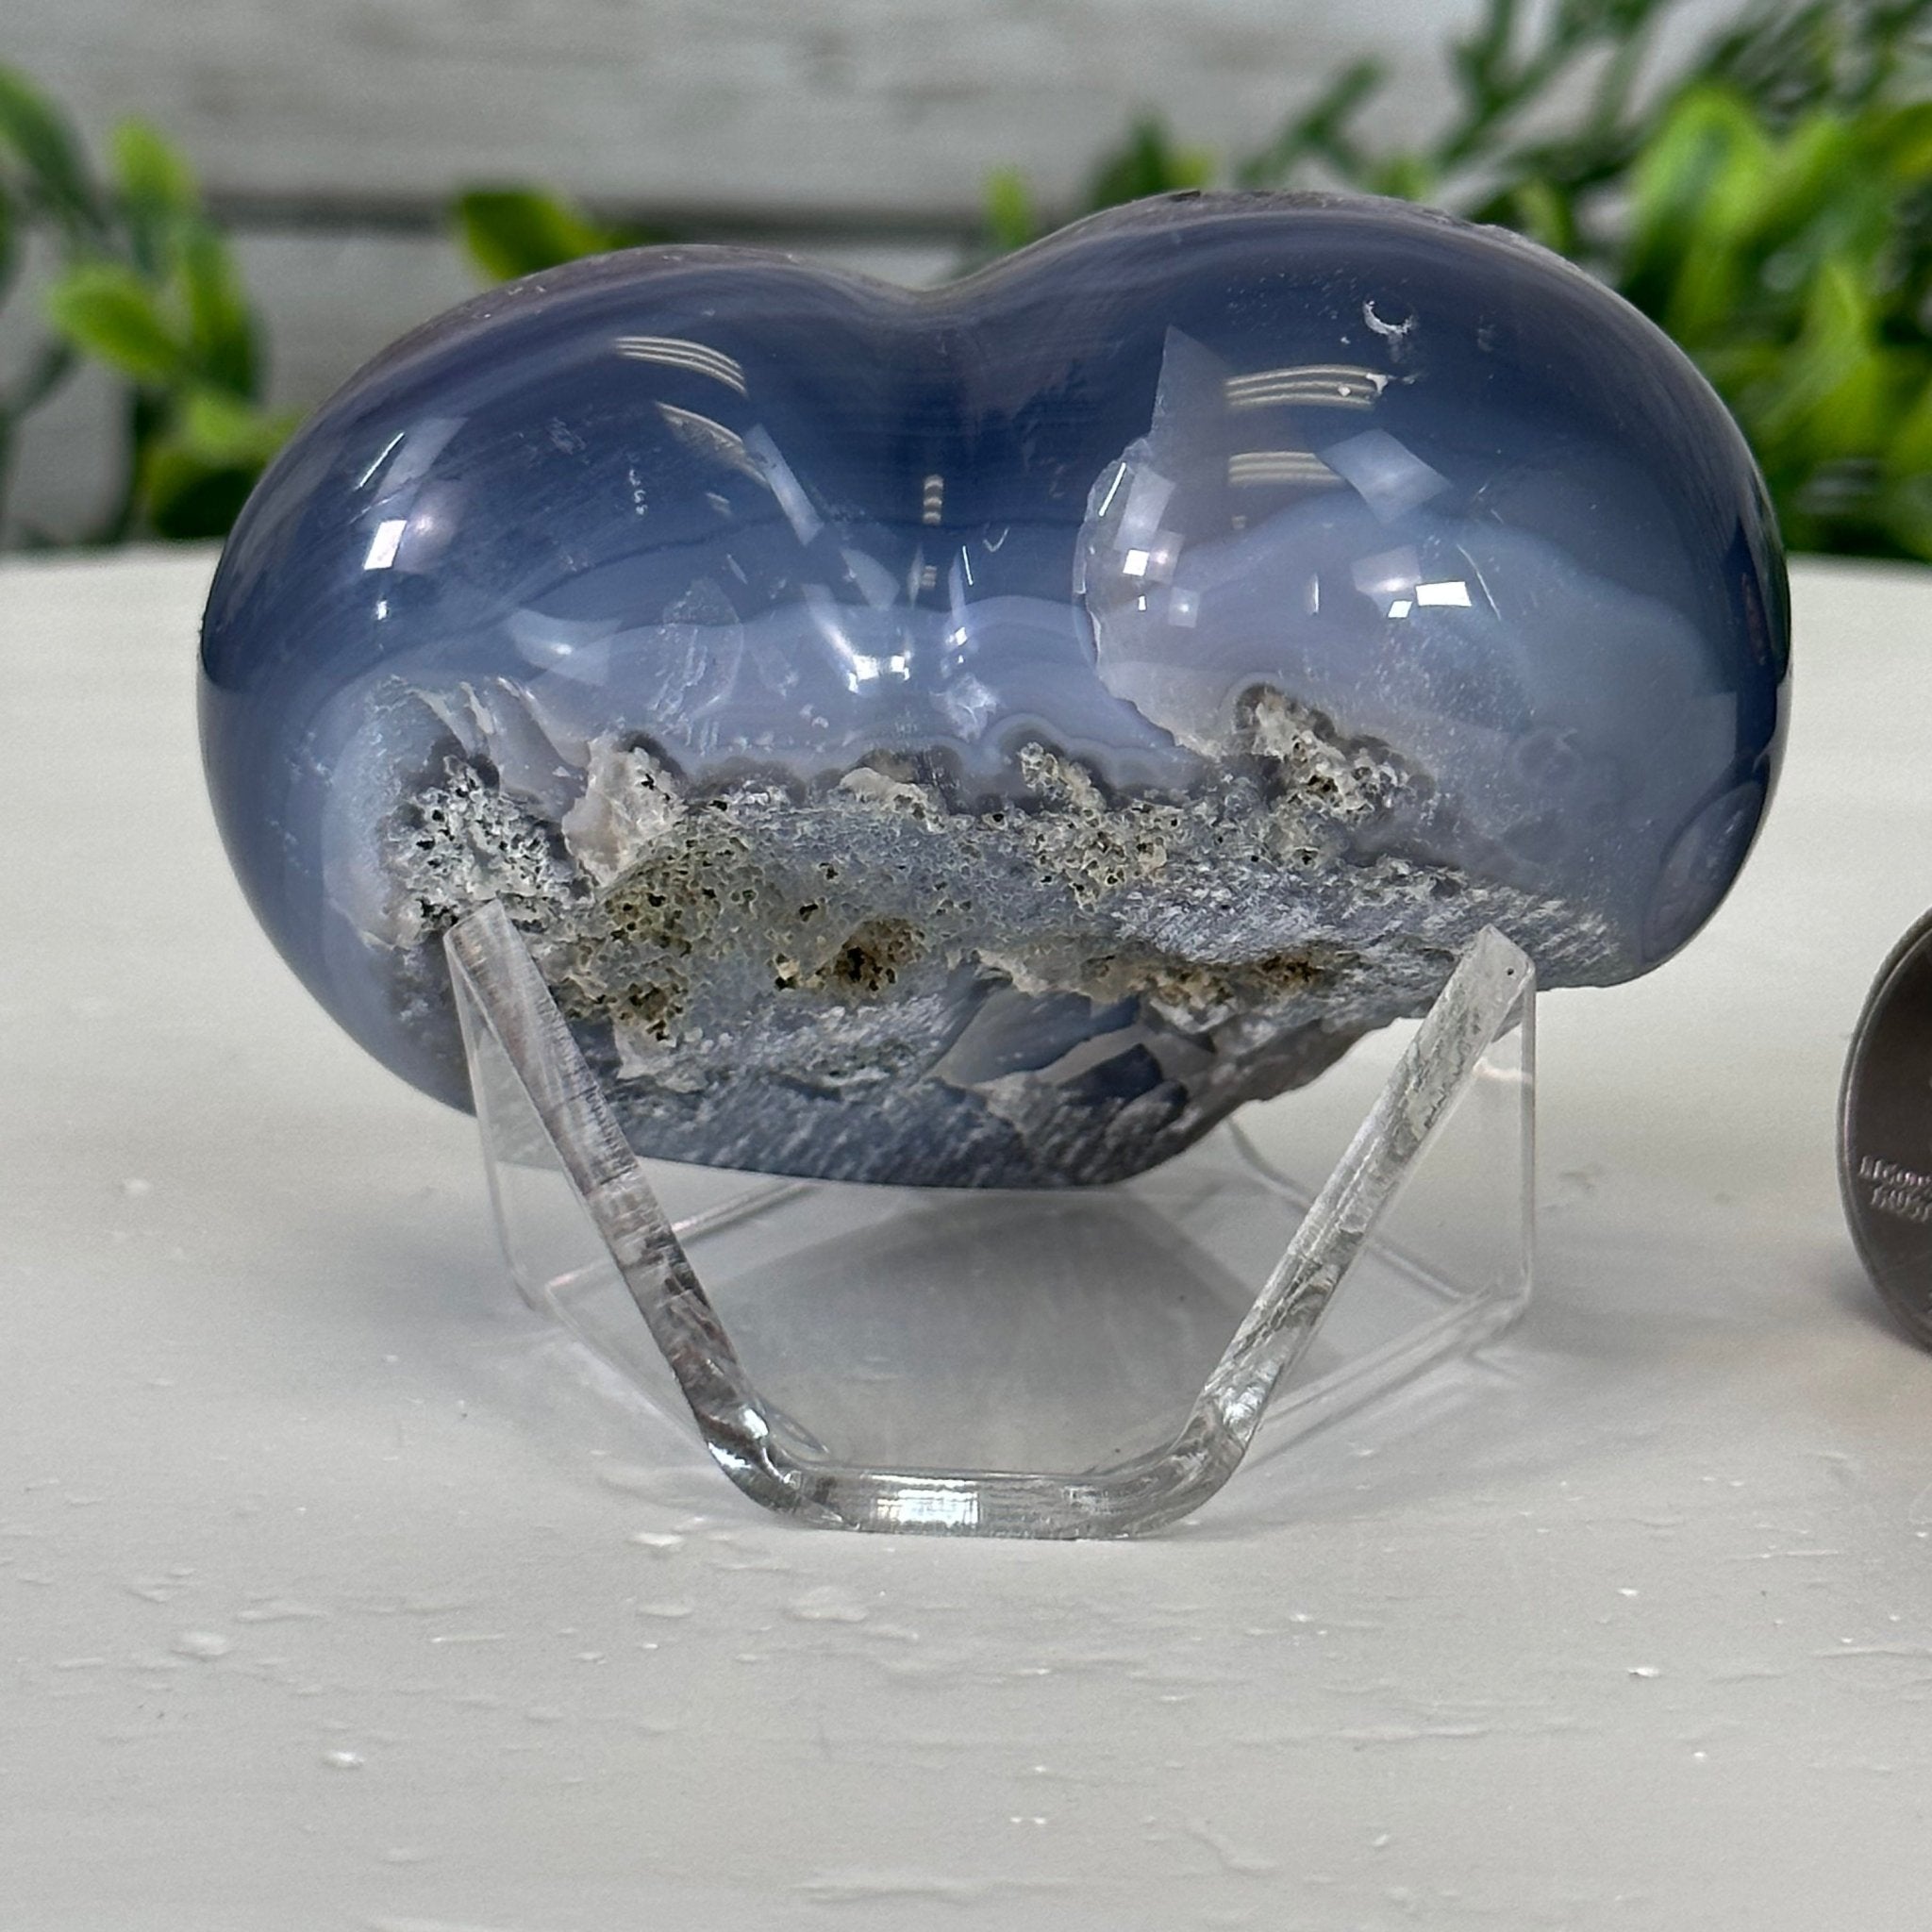 Extra Quality Amethyst Heart Geode on an Acrylic Stand, 0.48 lbs & 2.3" Tall #5462-0037 by Brazil Gems - Brazil GemsBrazil GemsExtra Quality Amethyst Heart Geode on an Acrylic Stand, 0.48 lbs & 2.3" Tall #5462-0037 by Brazil GemsHearts5462-0037